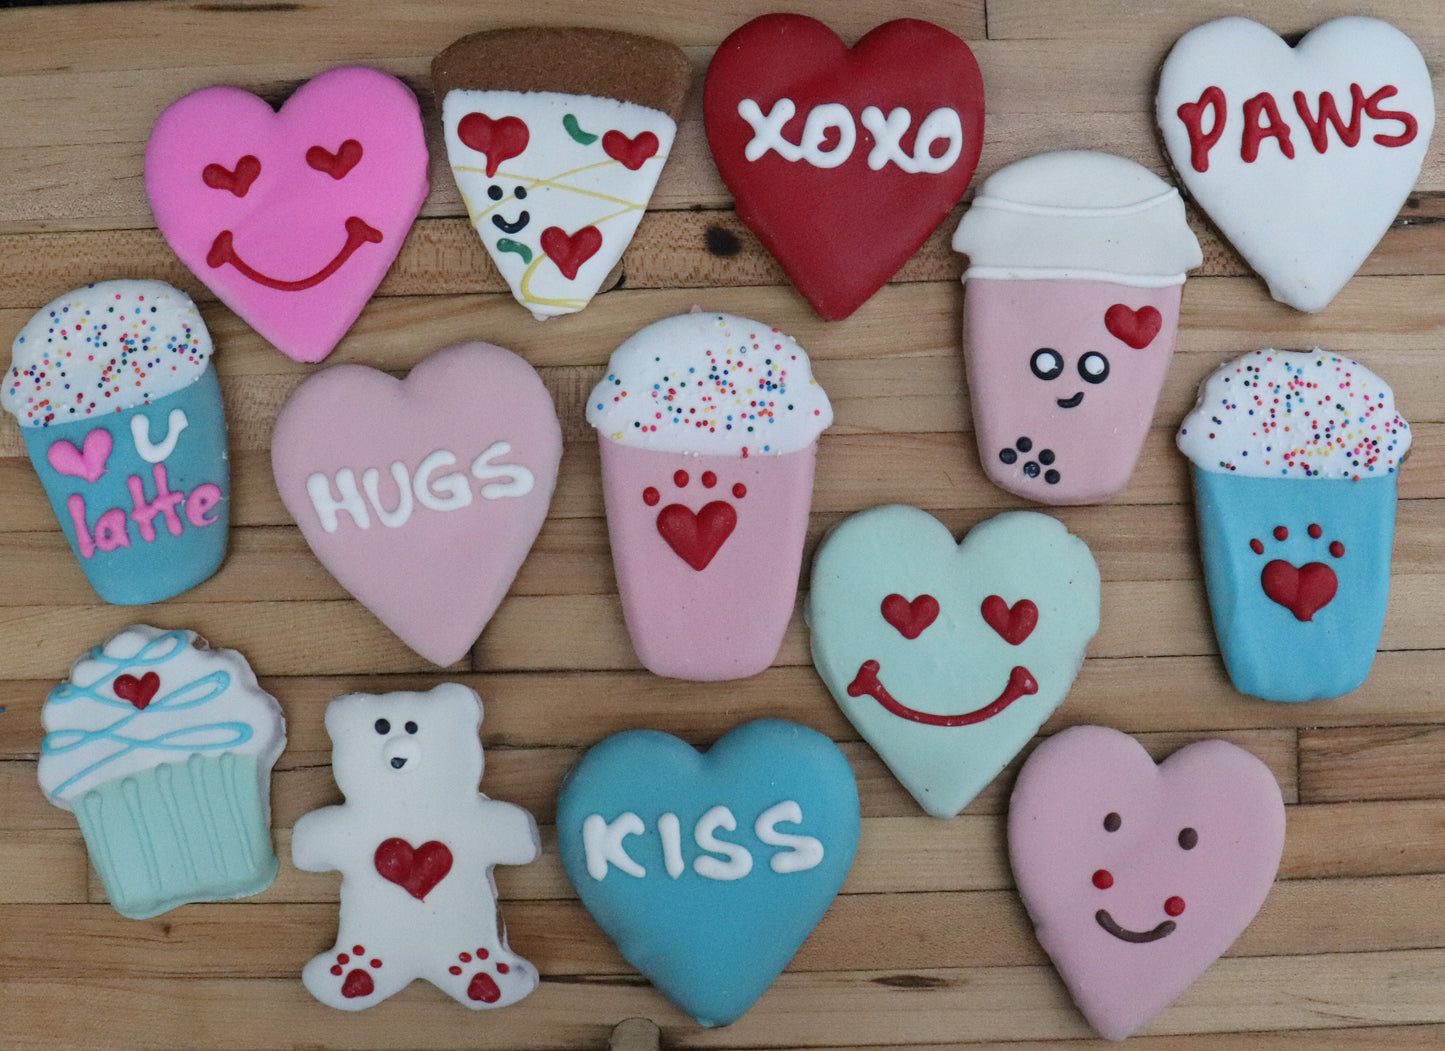 Assorted Pupentine's Day Cookies - Set of 6